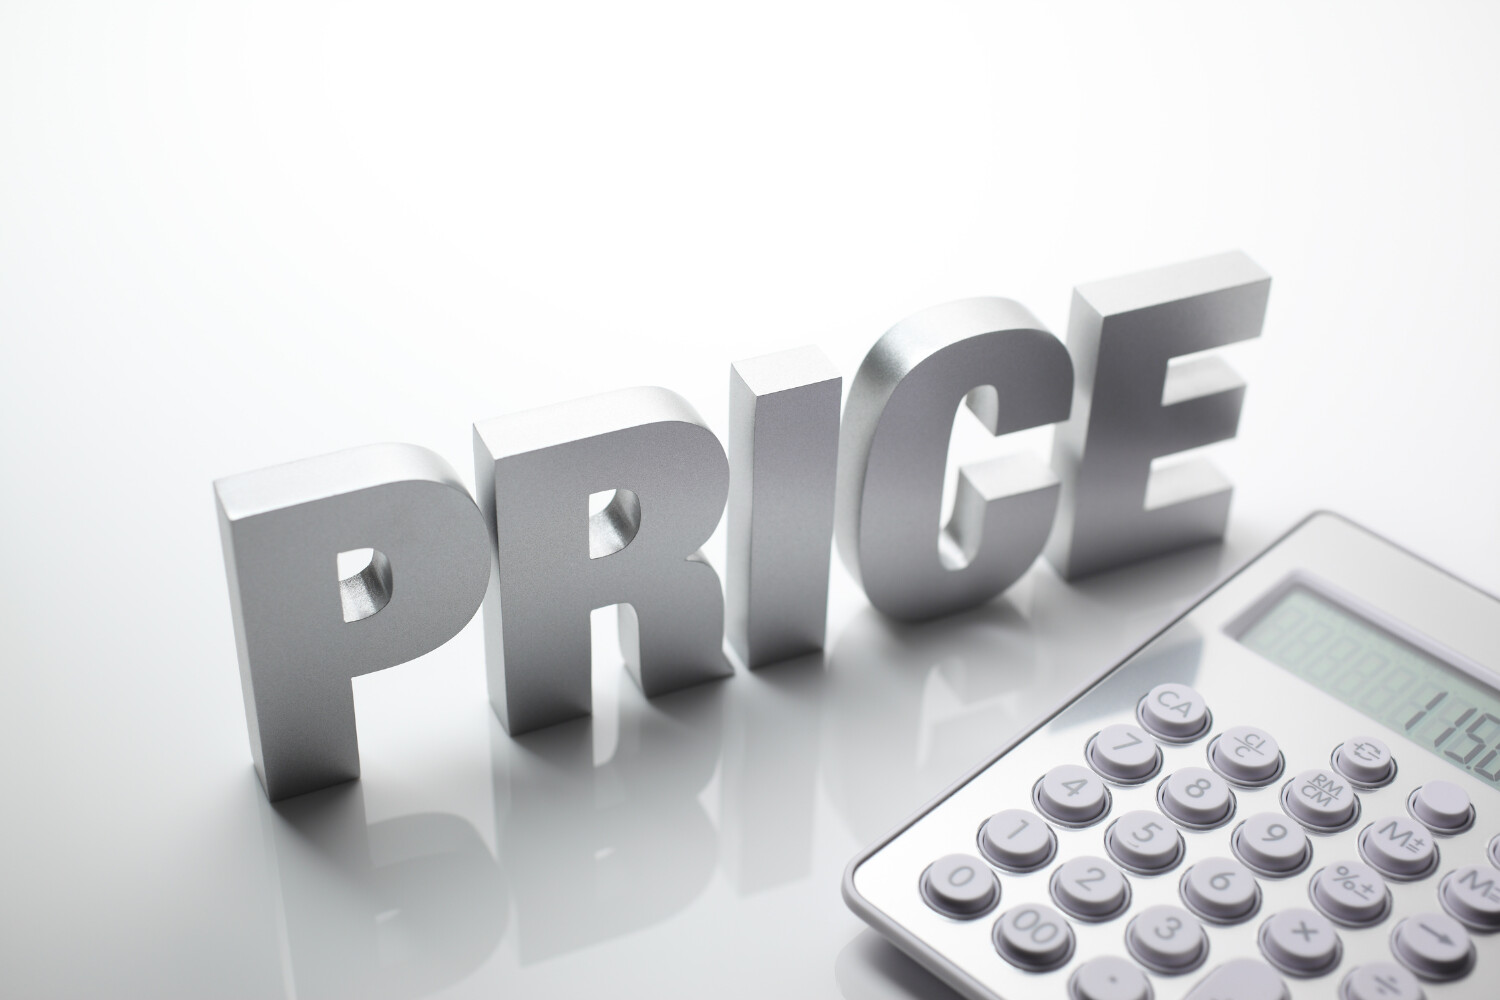 How do I simplify pricing my business services?